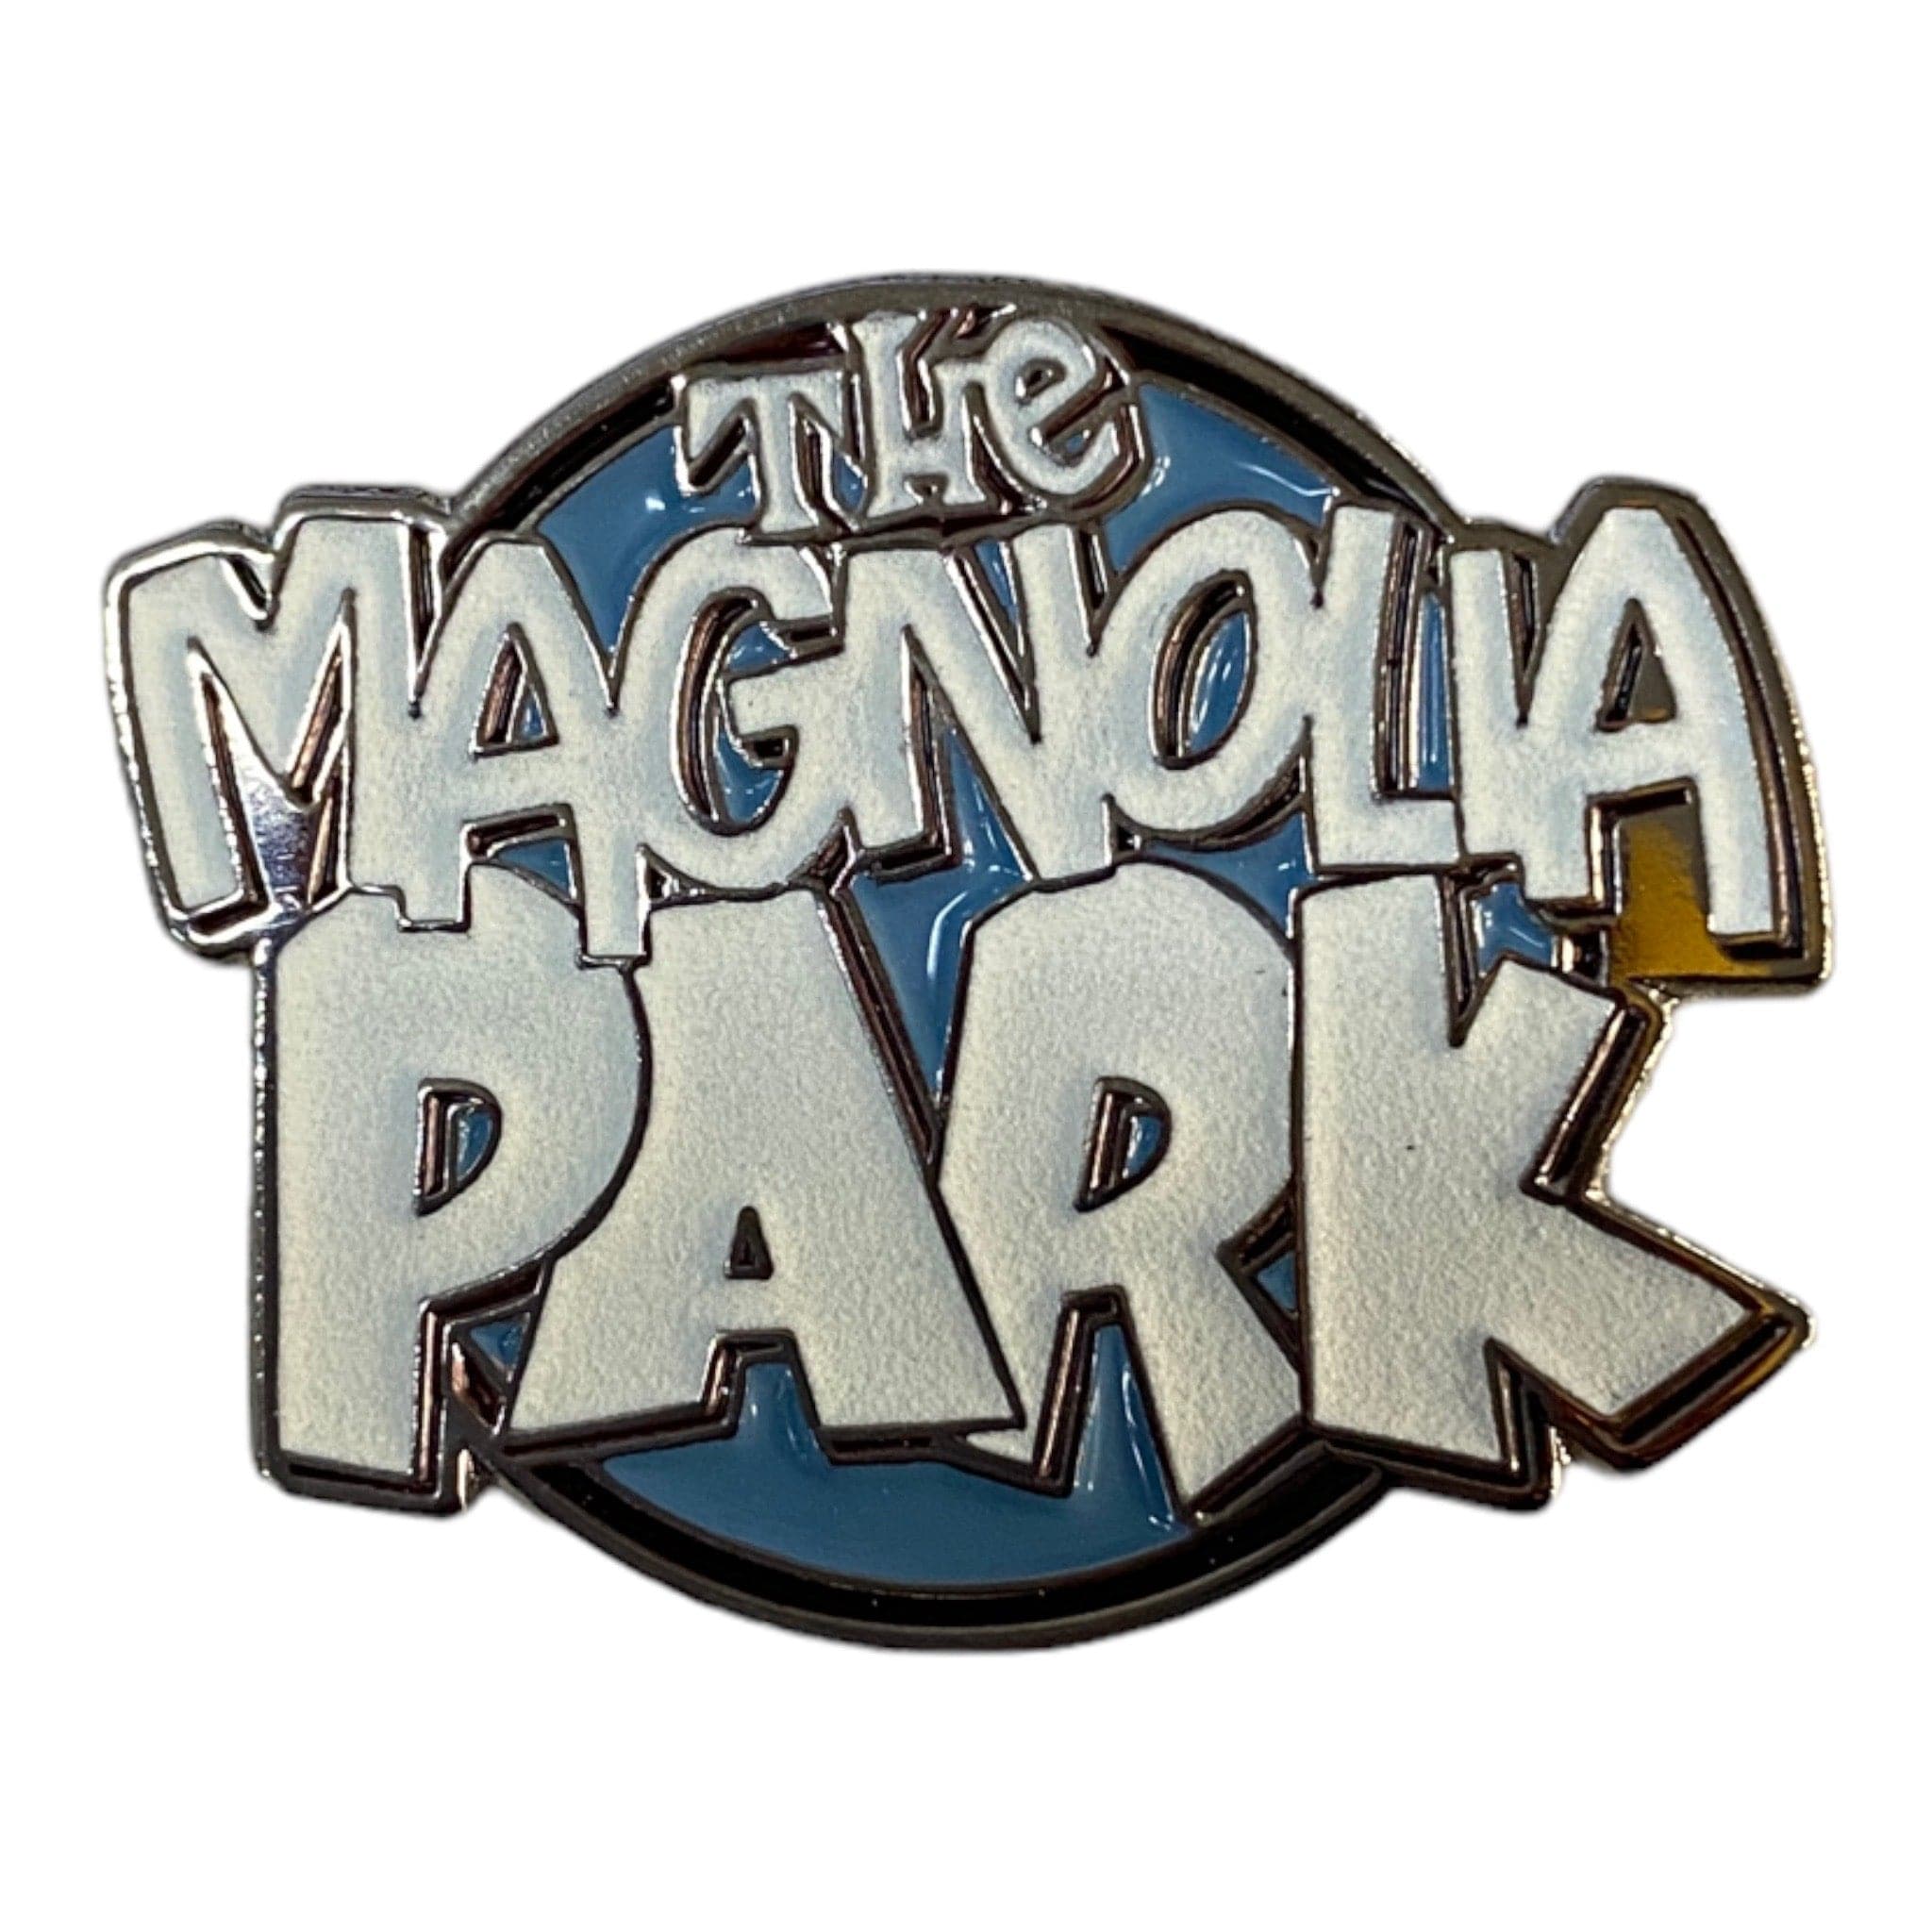 THE MAGNOLIA PARK - "SAVED BY THE PARK" HAT PIN - The Magnolia Park